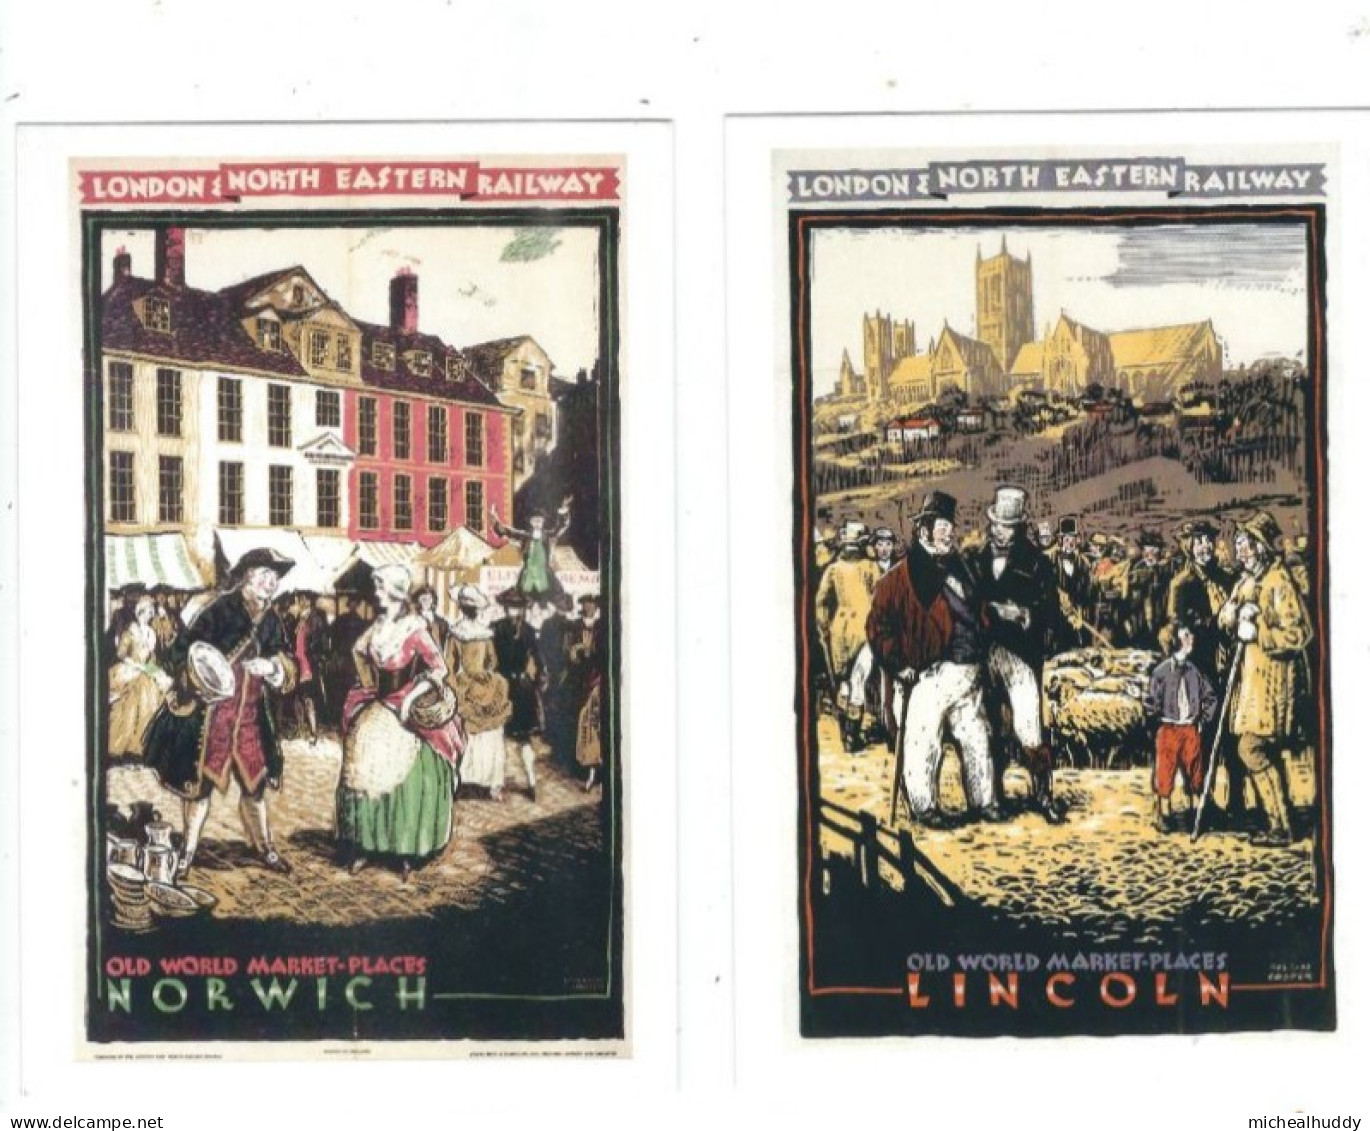 2 POSTCARDS UK RAIL ADVERTISING  LNER OLD WORTLD MARKET PLACES  LINCOLN/ NORWICH - Reclame